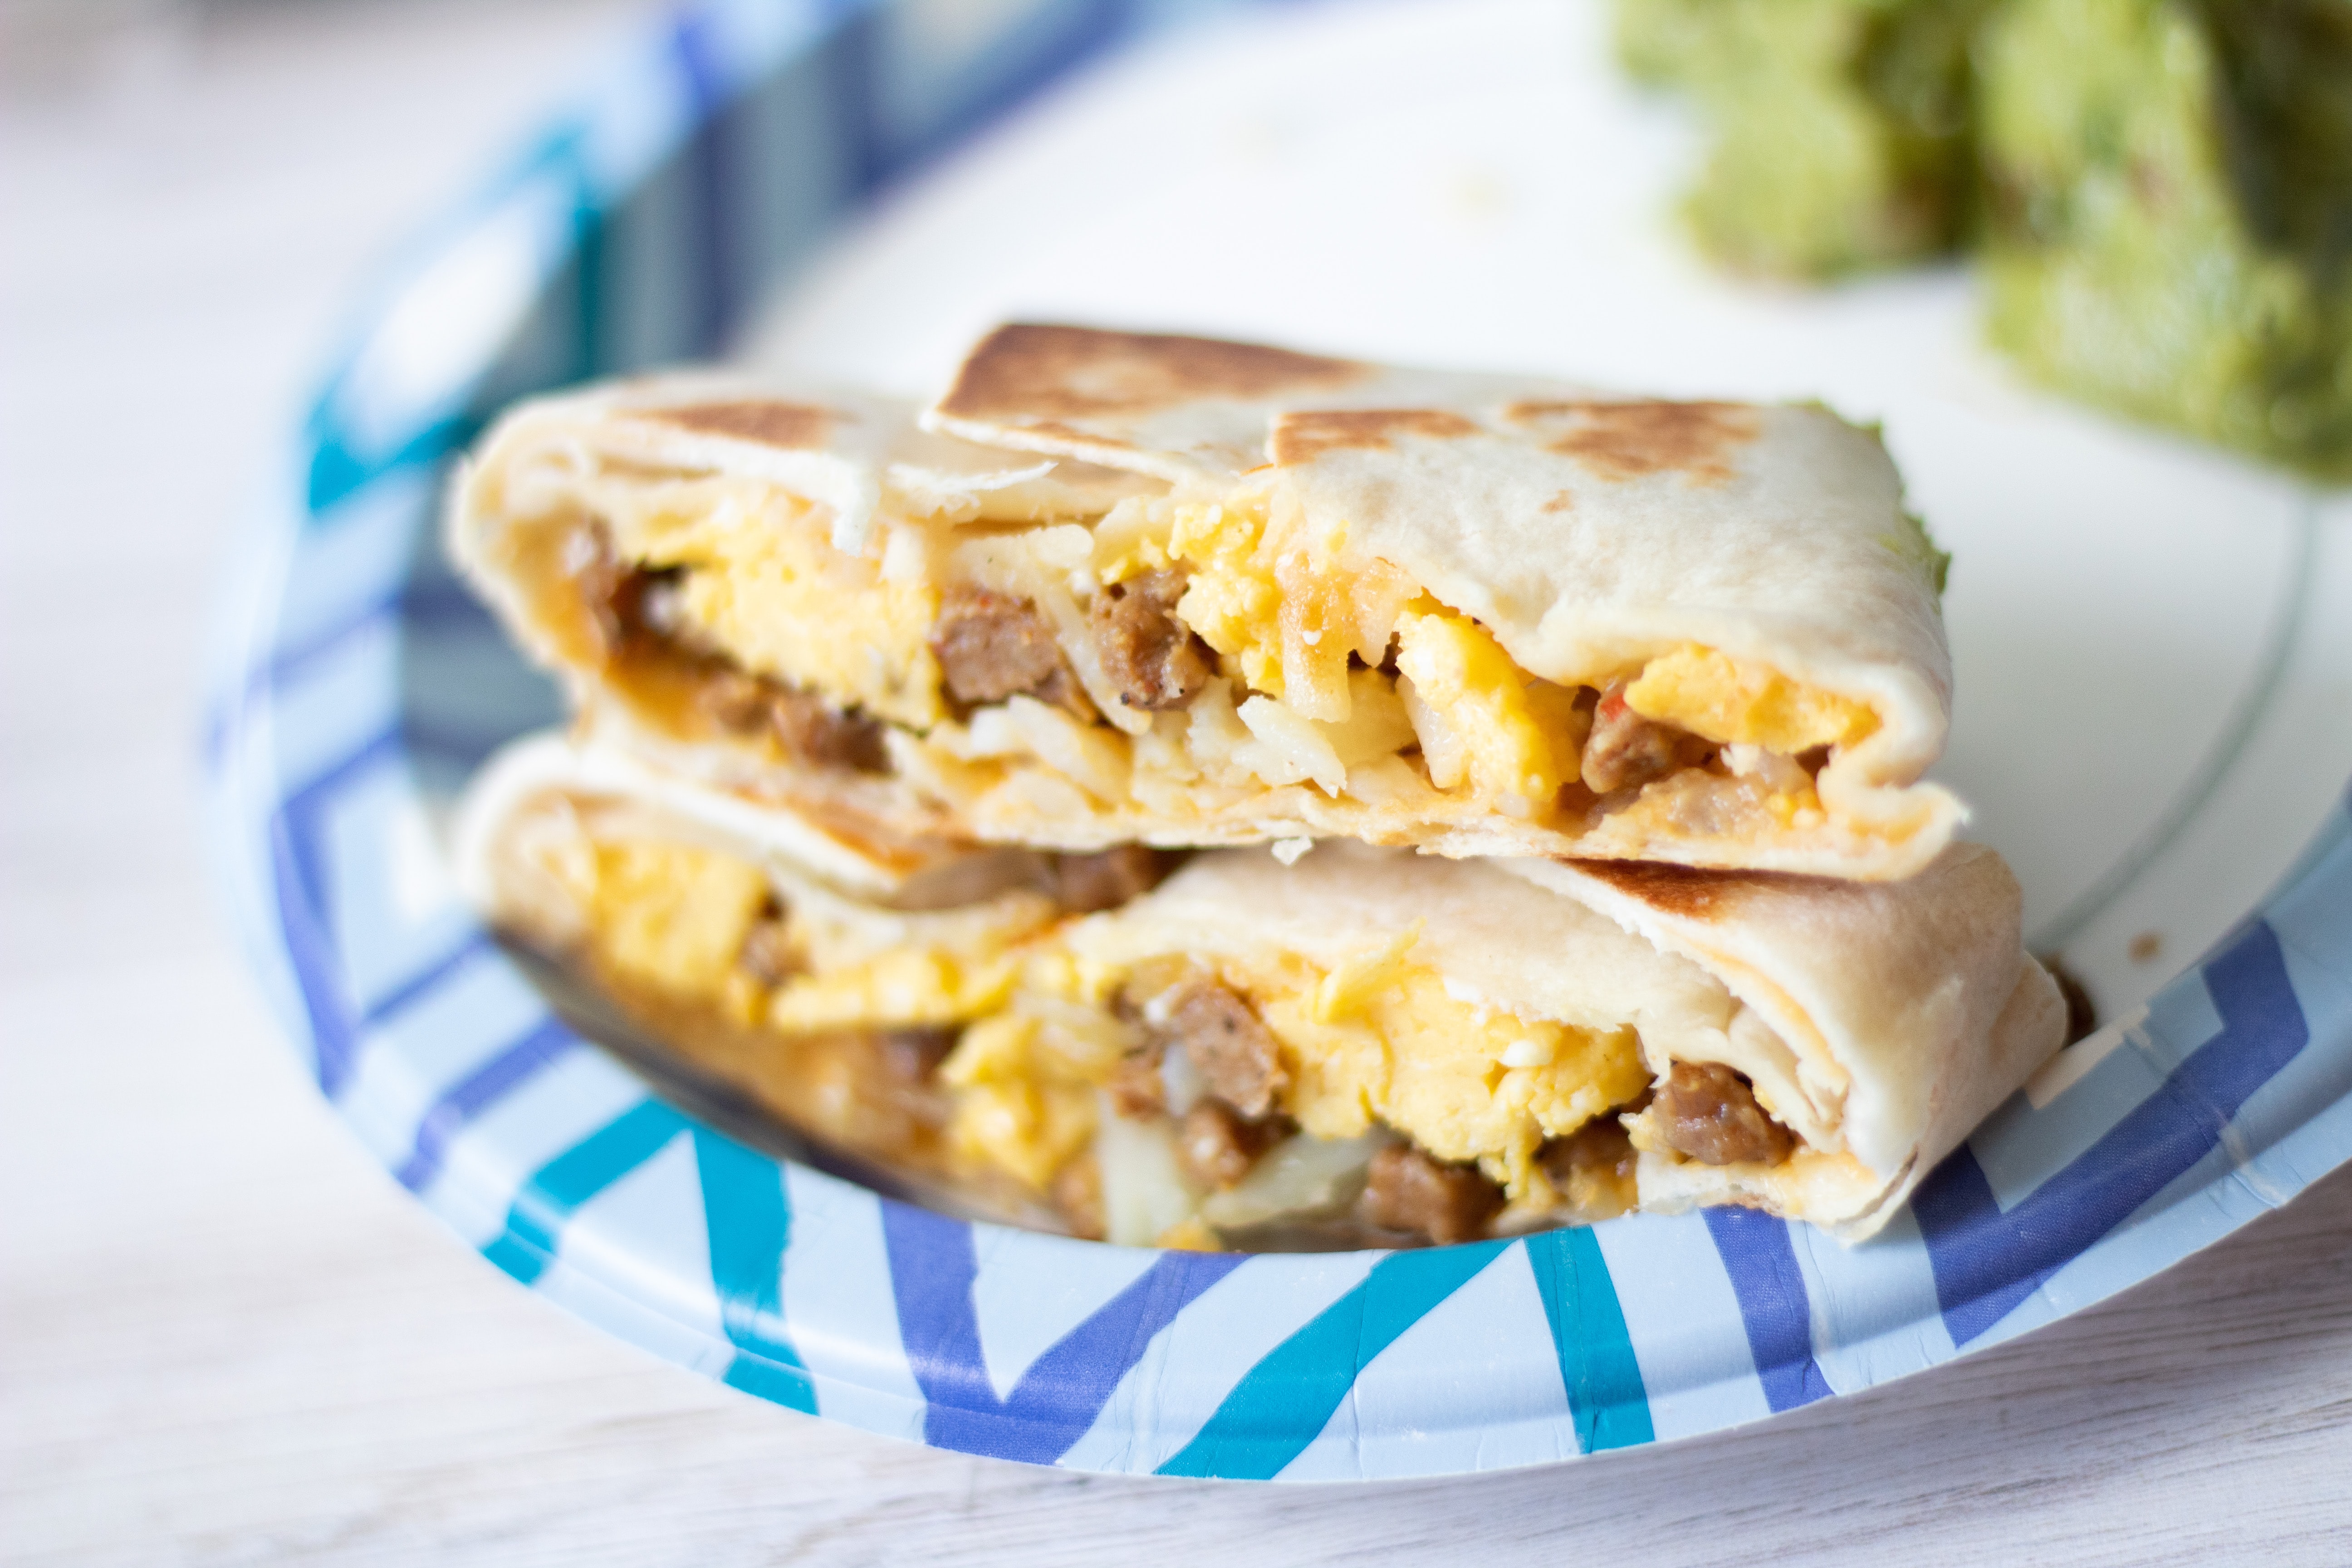 A breakfast burrito filled with egg and meat. 